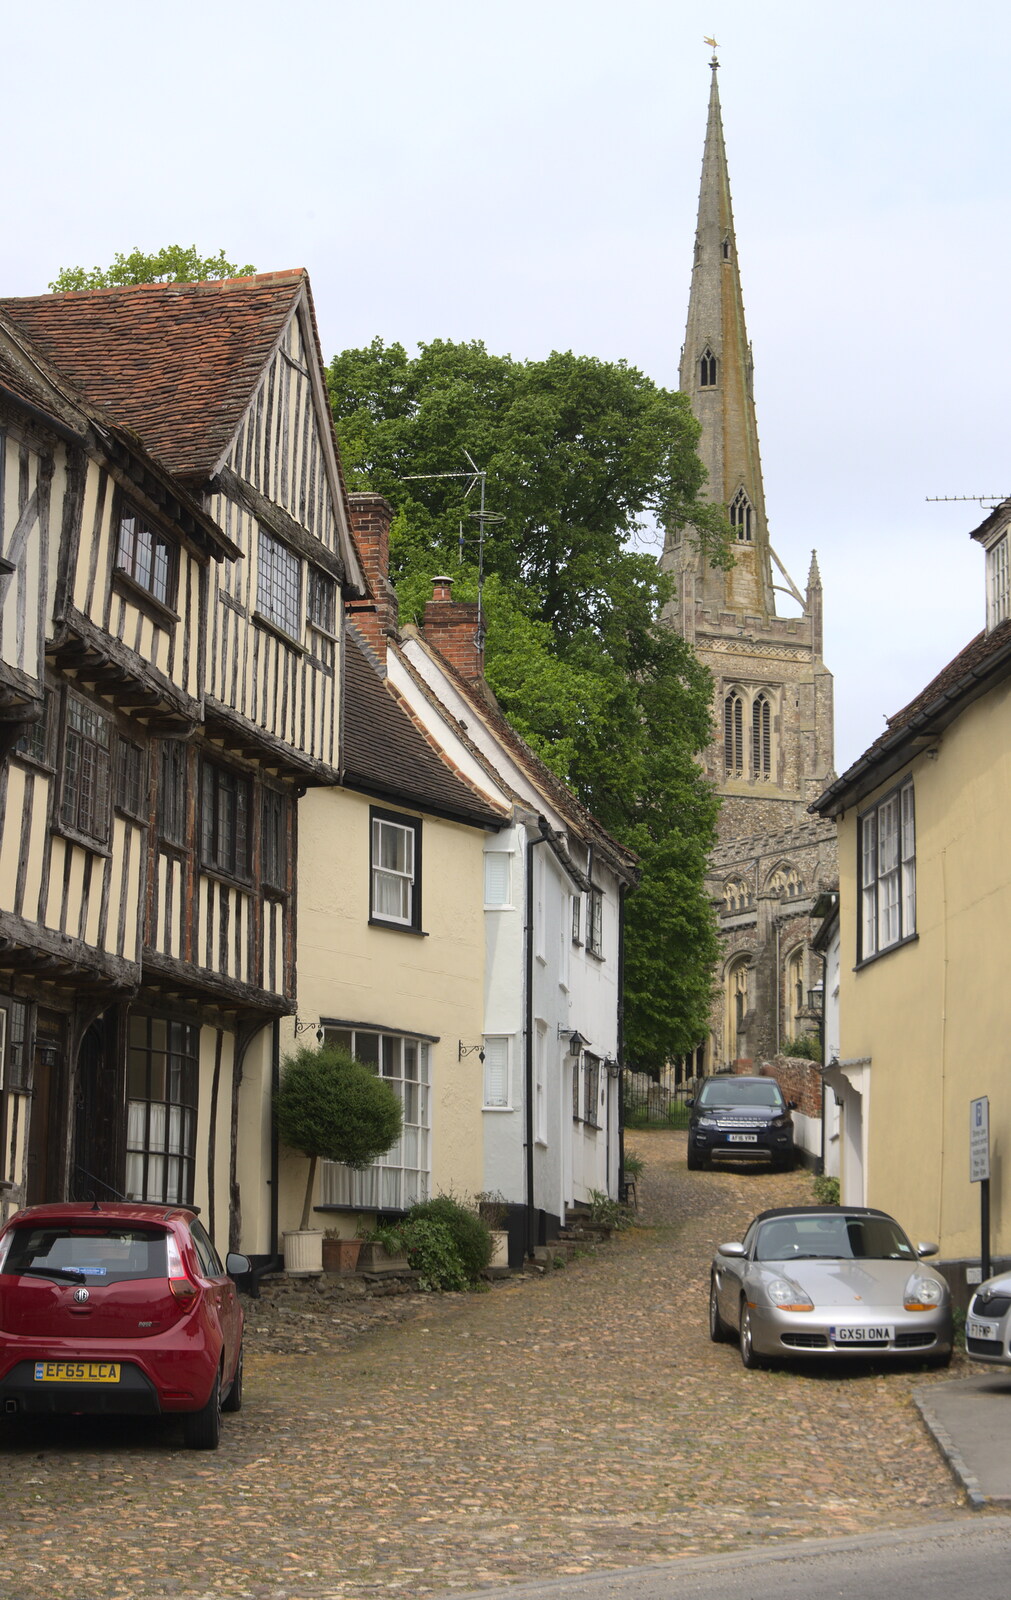 Stoney Lane, Thaxted from A Postcard From Thaxted, Essex - 7th May 2017